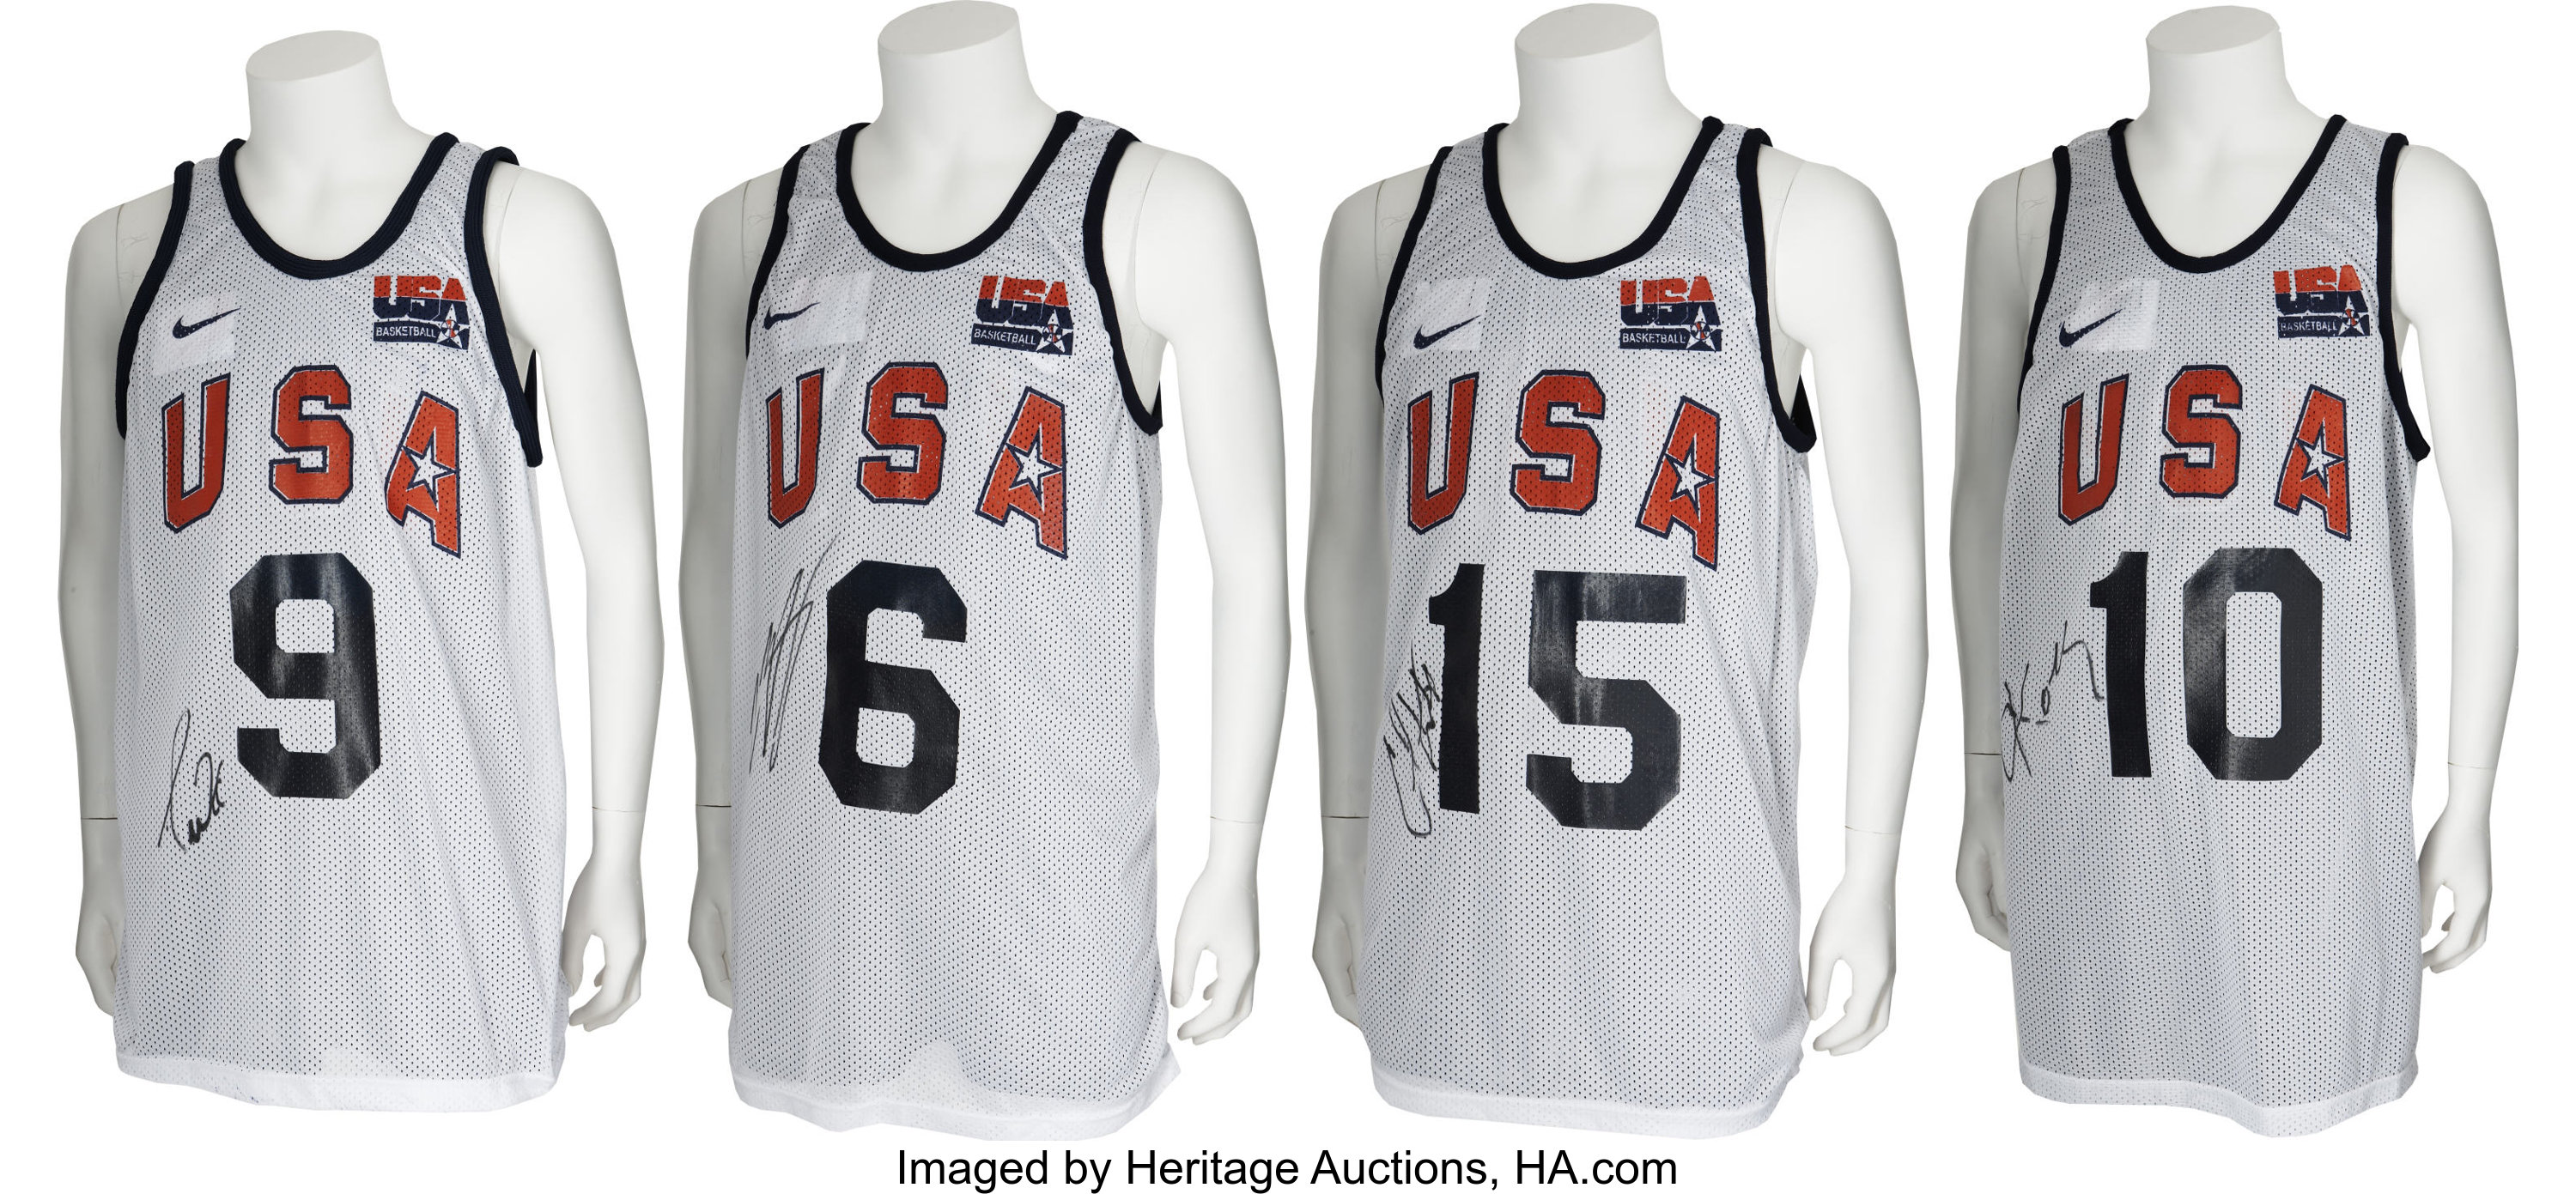 08 Usa Olympic Basketball Team Practice Worn Jerseys Lot Of 12 Lot 034 Heritage Auctions